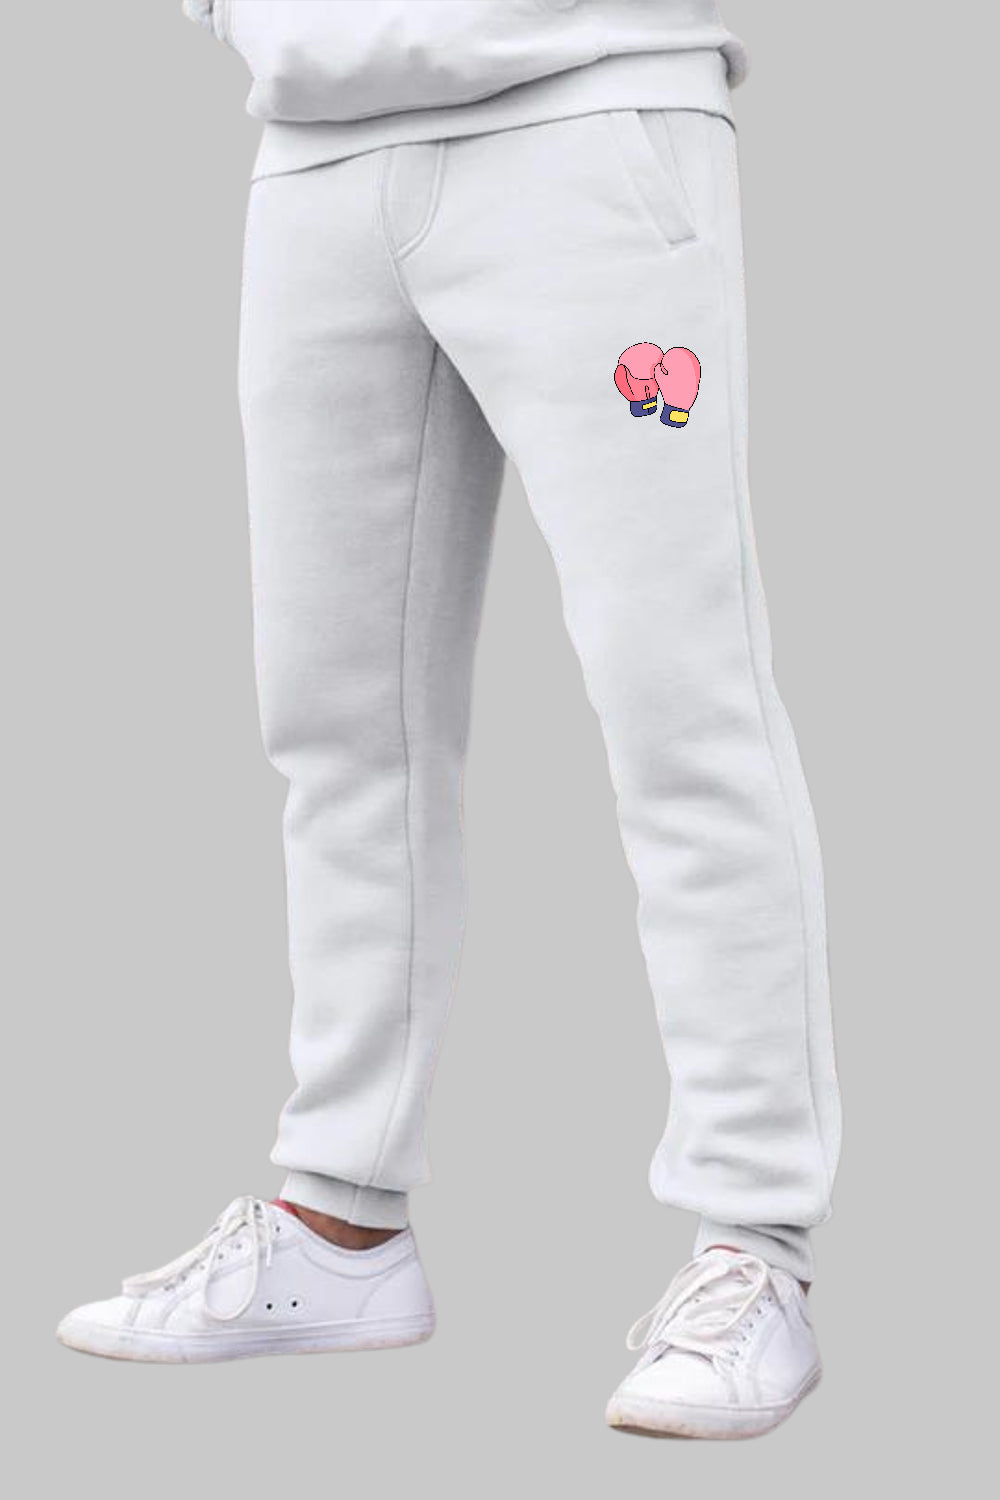 Boxing Graphic Printed White Joggers